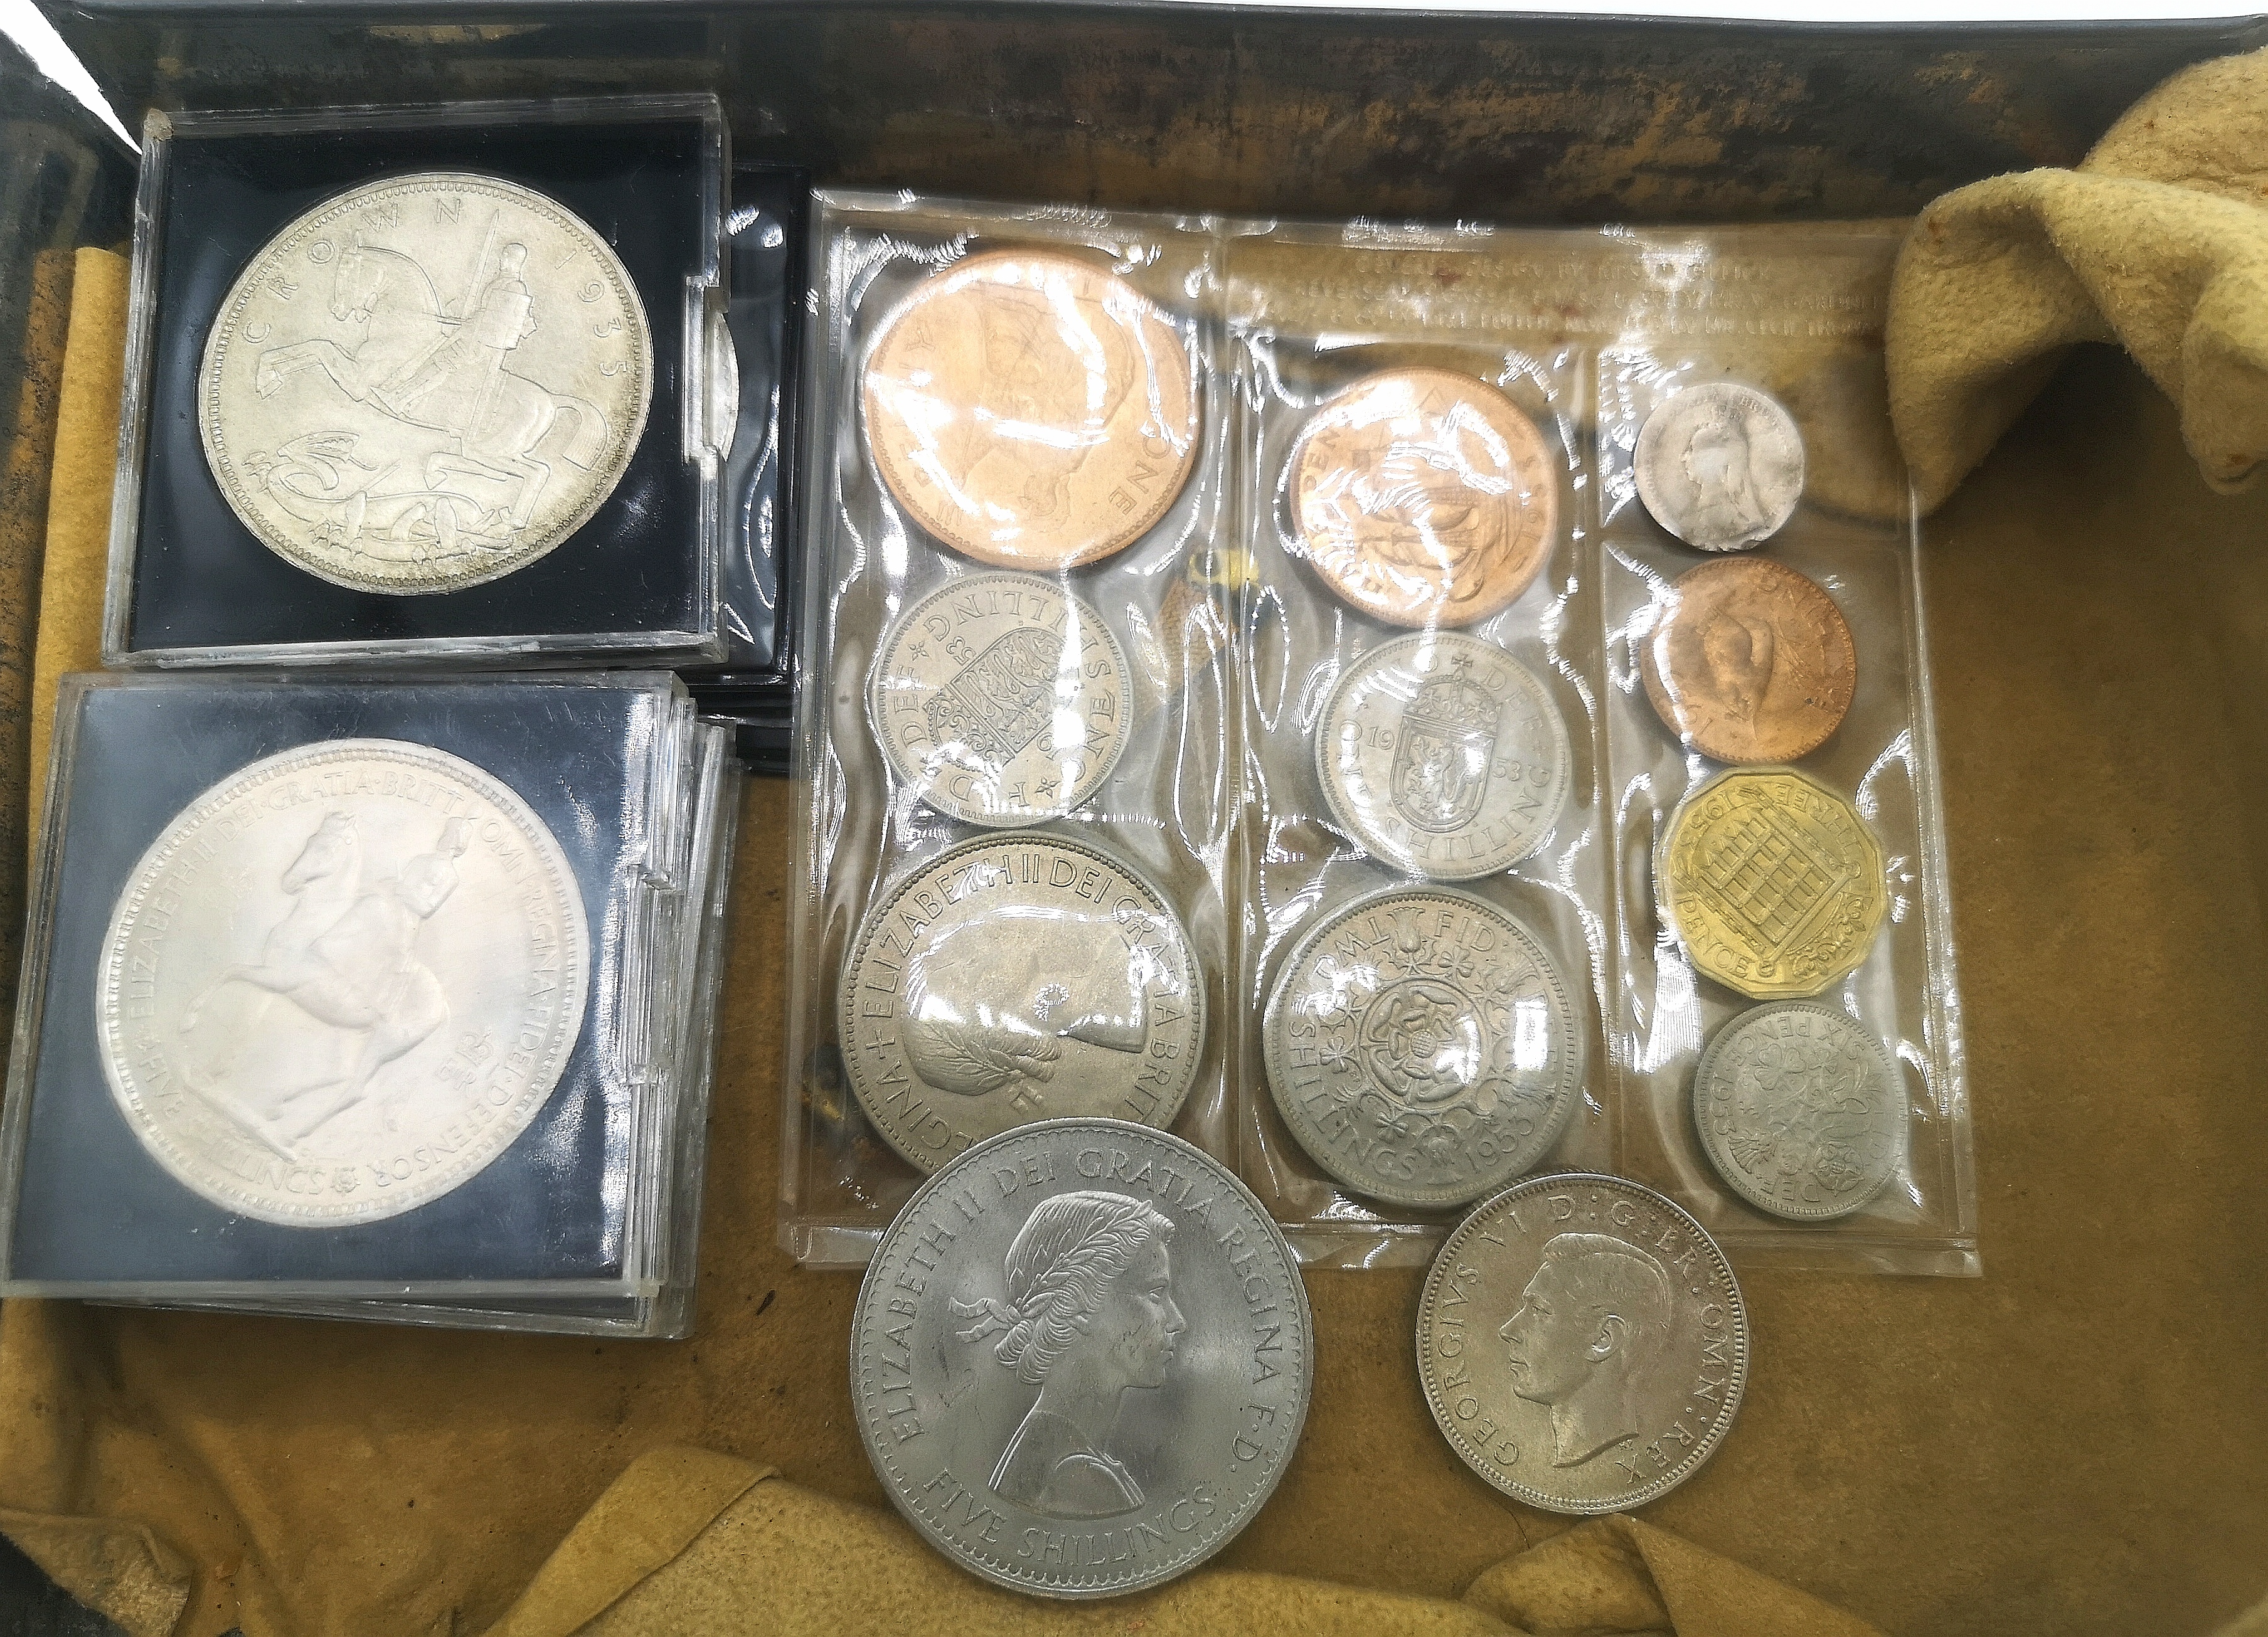 Small collection of British coins and presentation coins